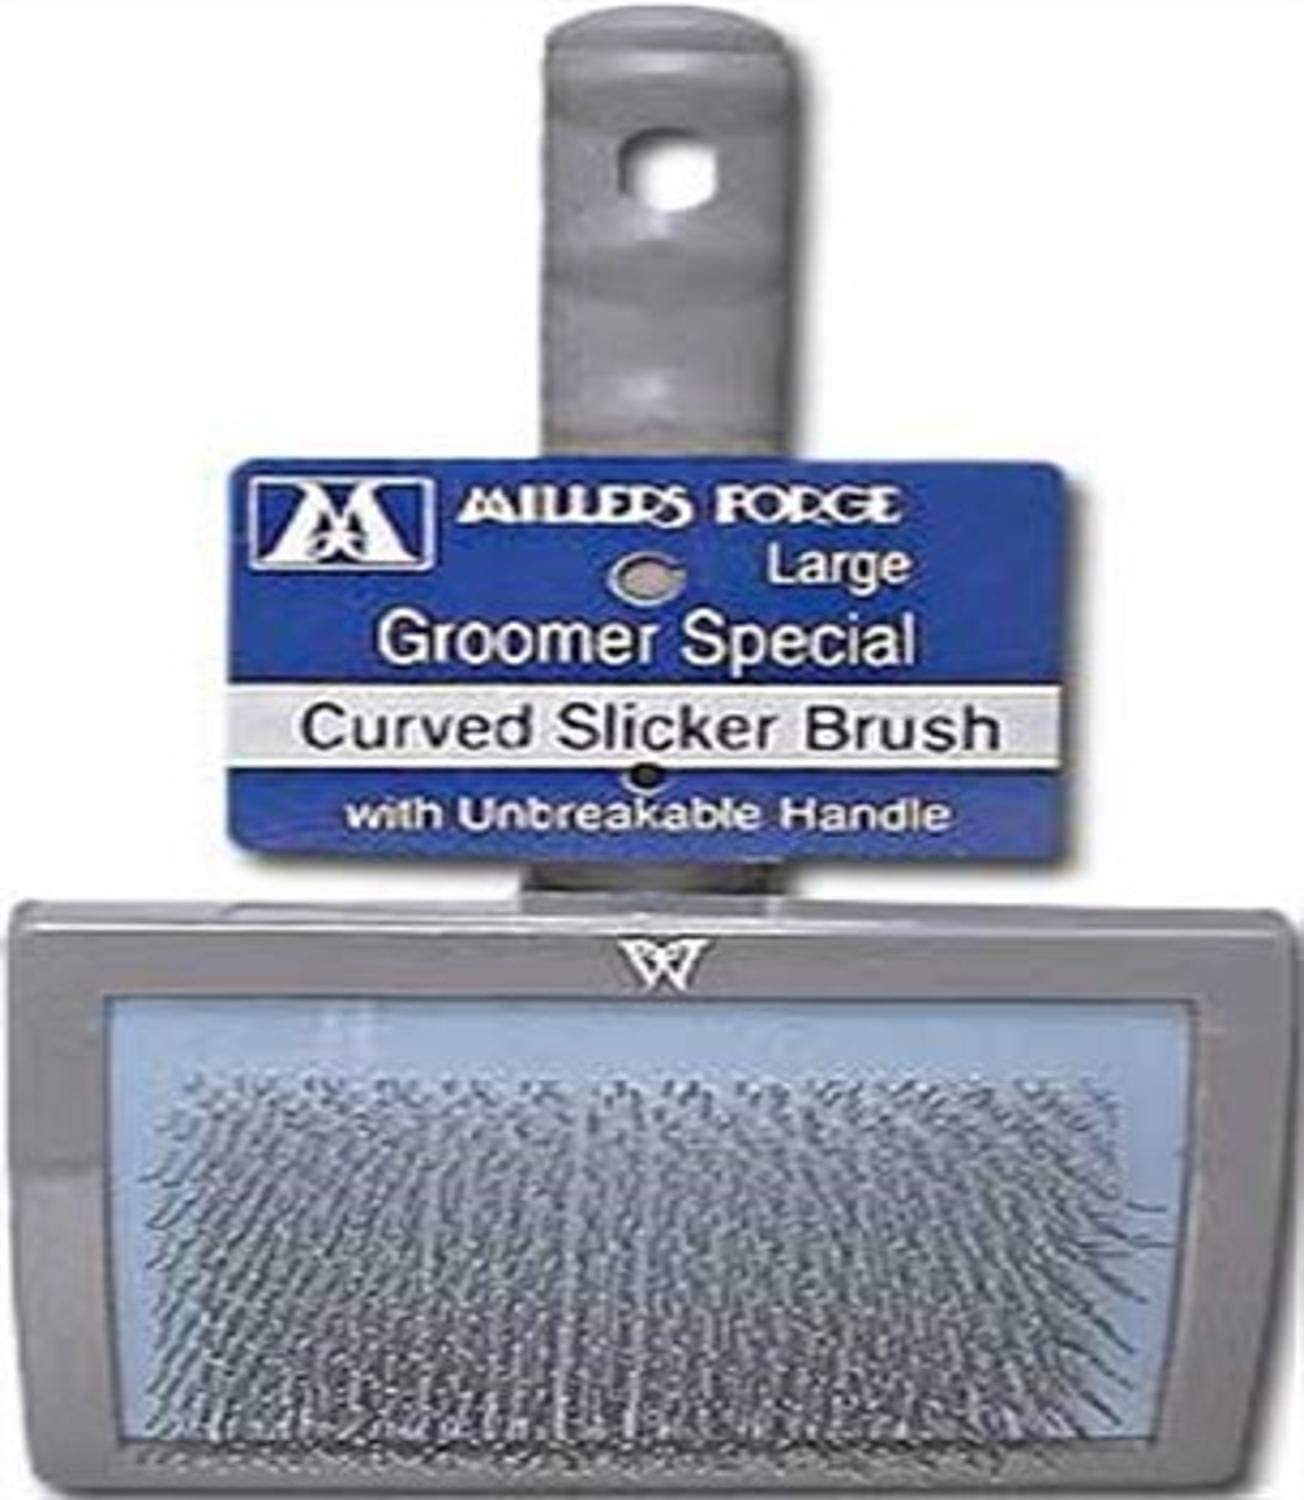 Millers Forge Curved Slicker Pet Brush - Large